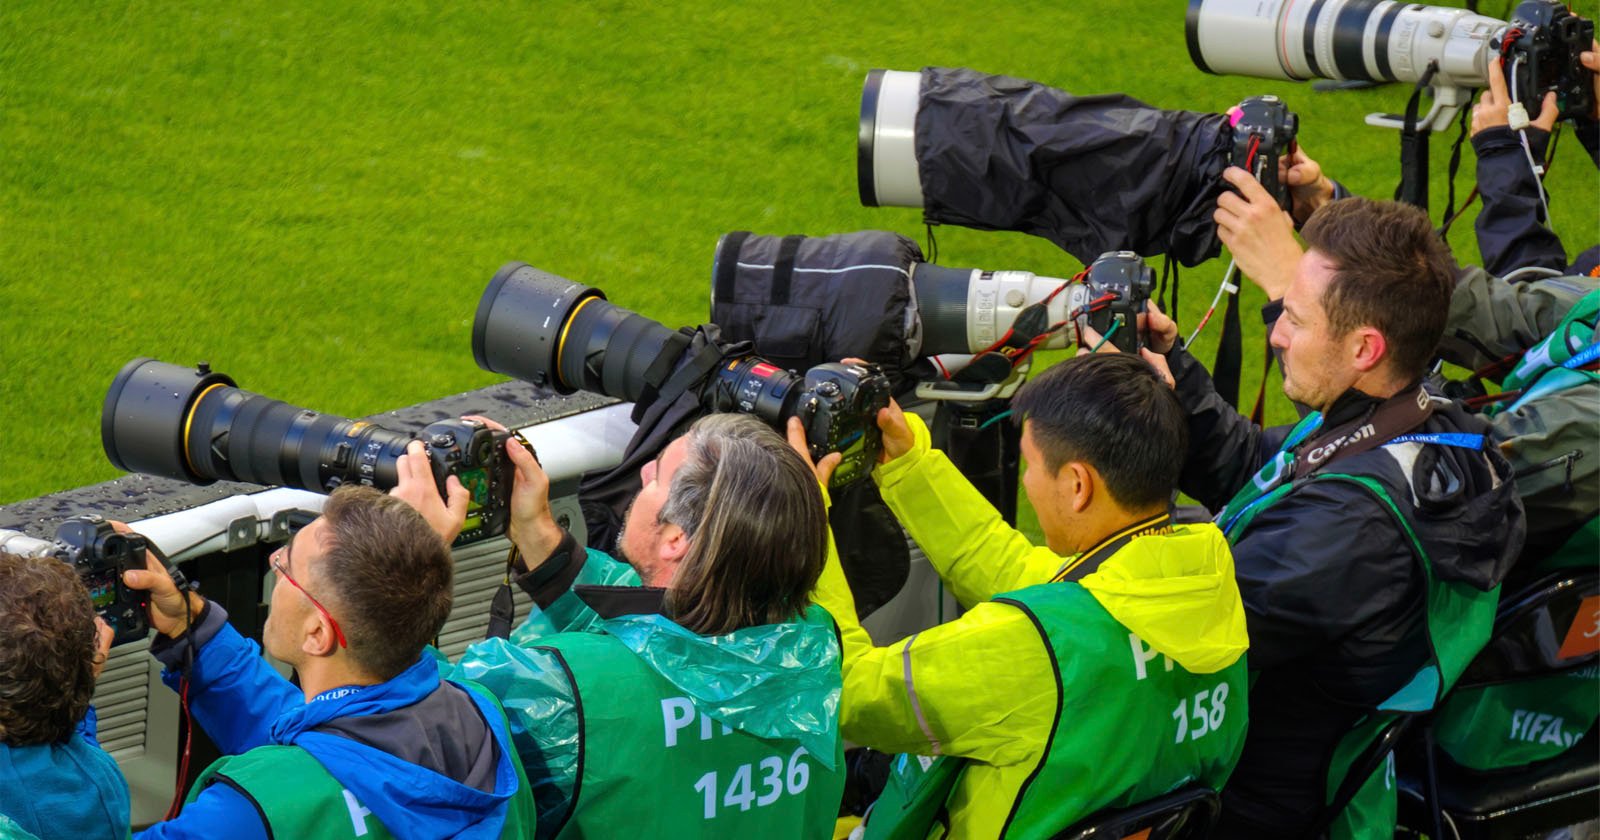 This Technology Makes Cameramen Disappear During Live Sports Games | PetaPixel